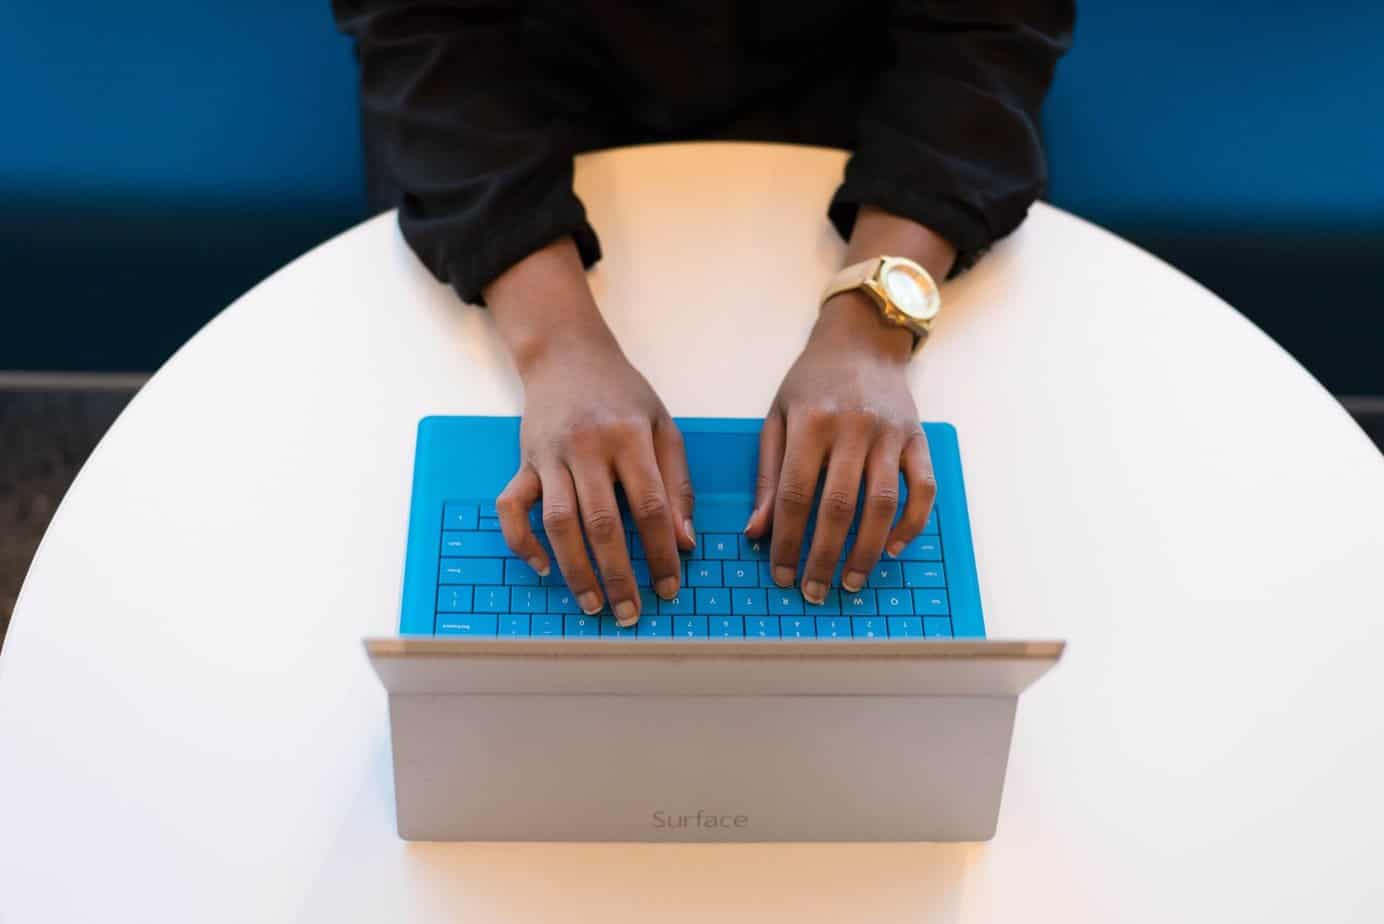 A brown-skinned woman wearing a gold watch typing on a tablet keyboard.